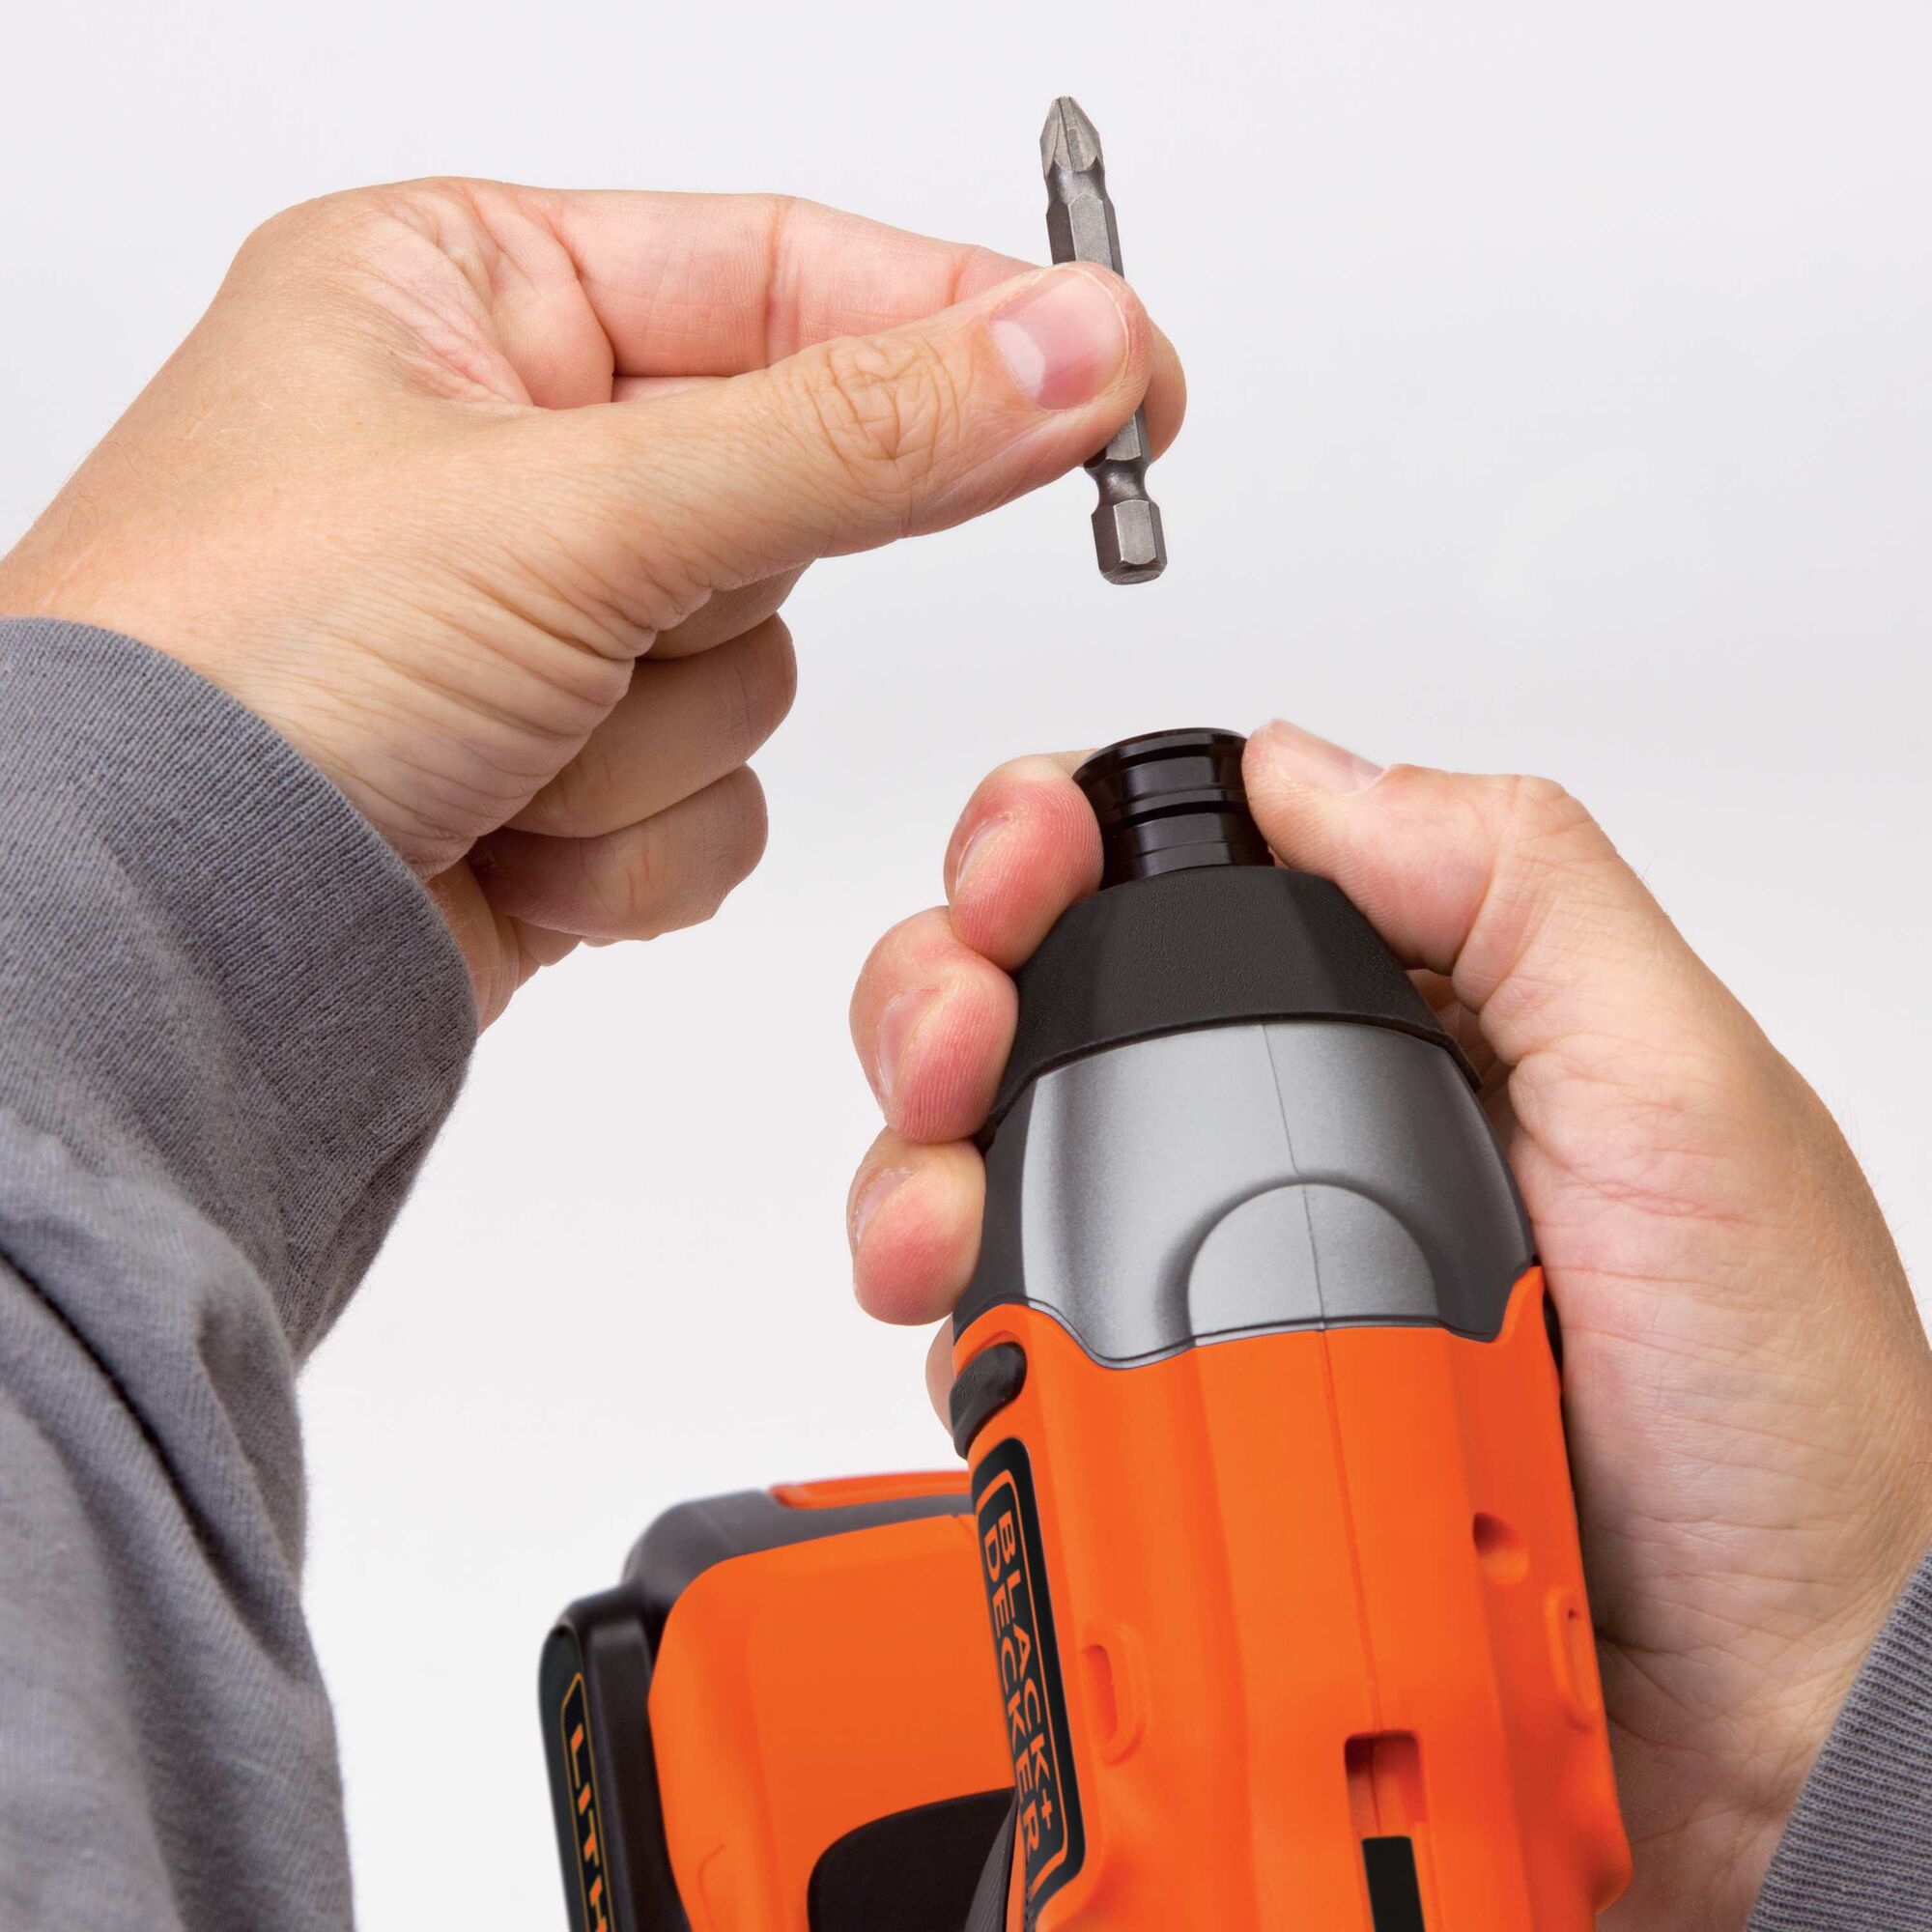 Quick release one quarter inch hex chuck feature of MAX Lithium Impact Driver.